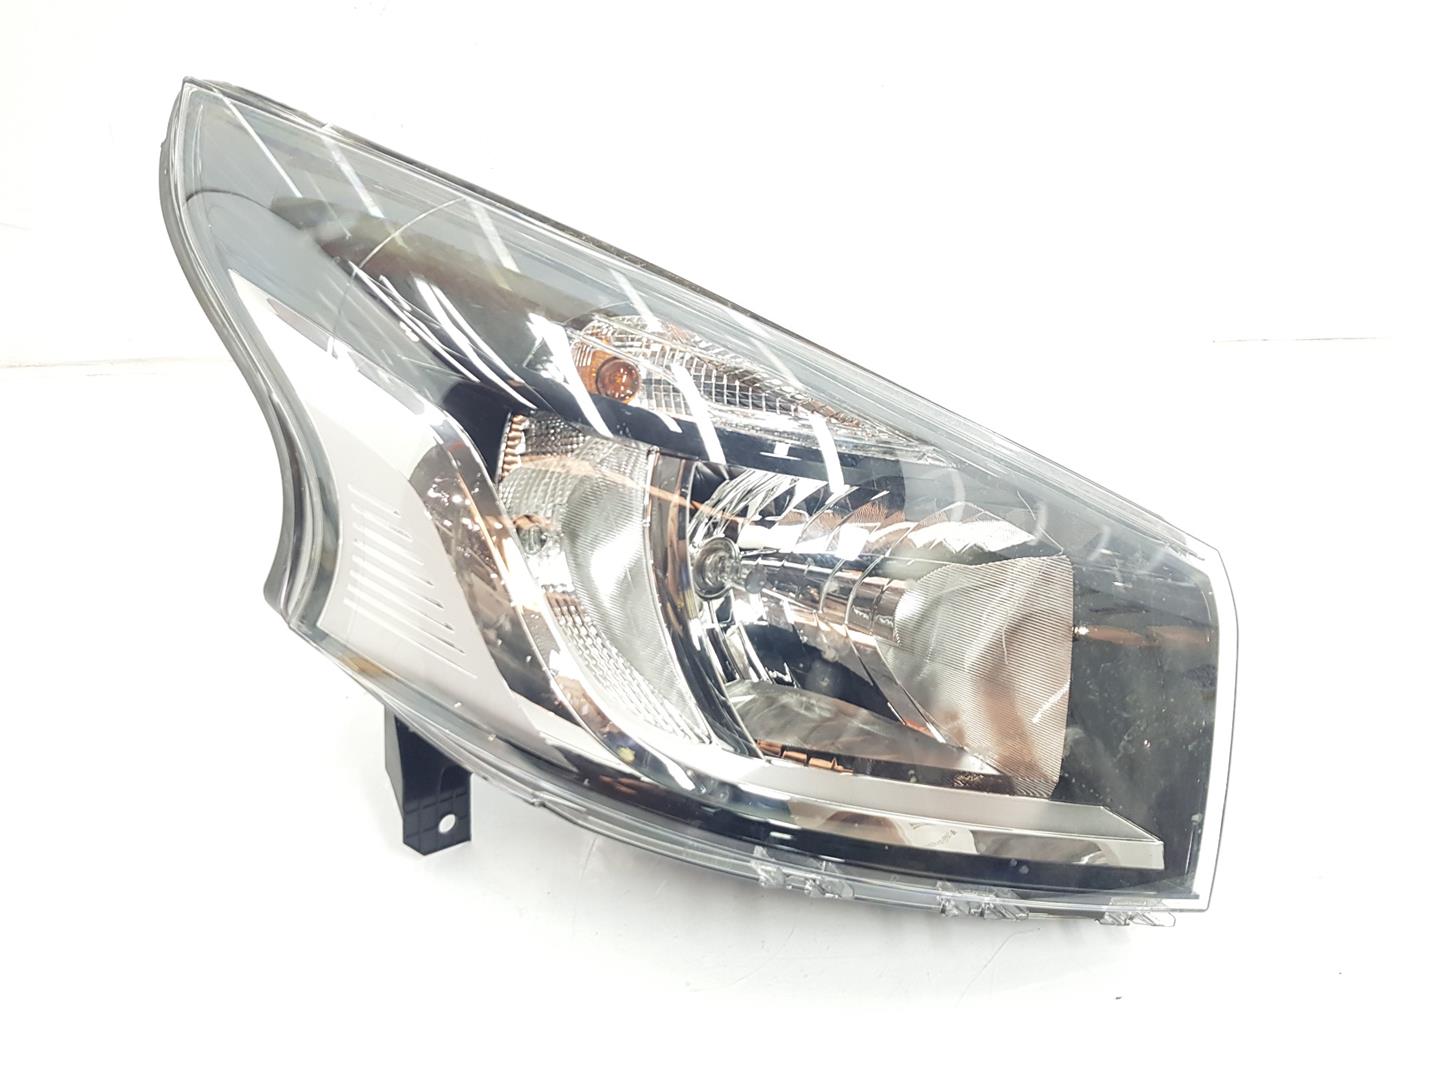 RENAULT Trafic 2 generation (2001-2015) Front Right Headlight 260109424R, 1EE011410-22, 2222DL 19890702